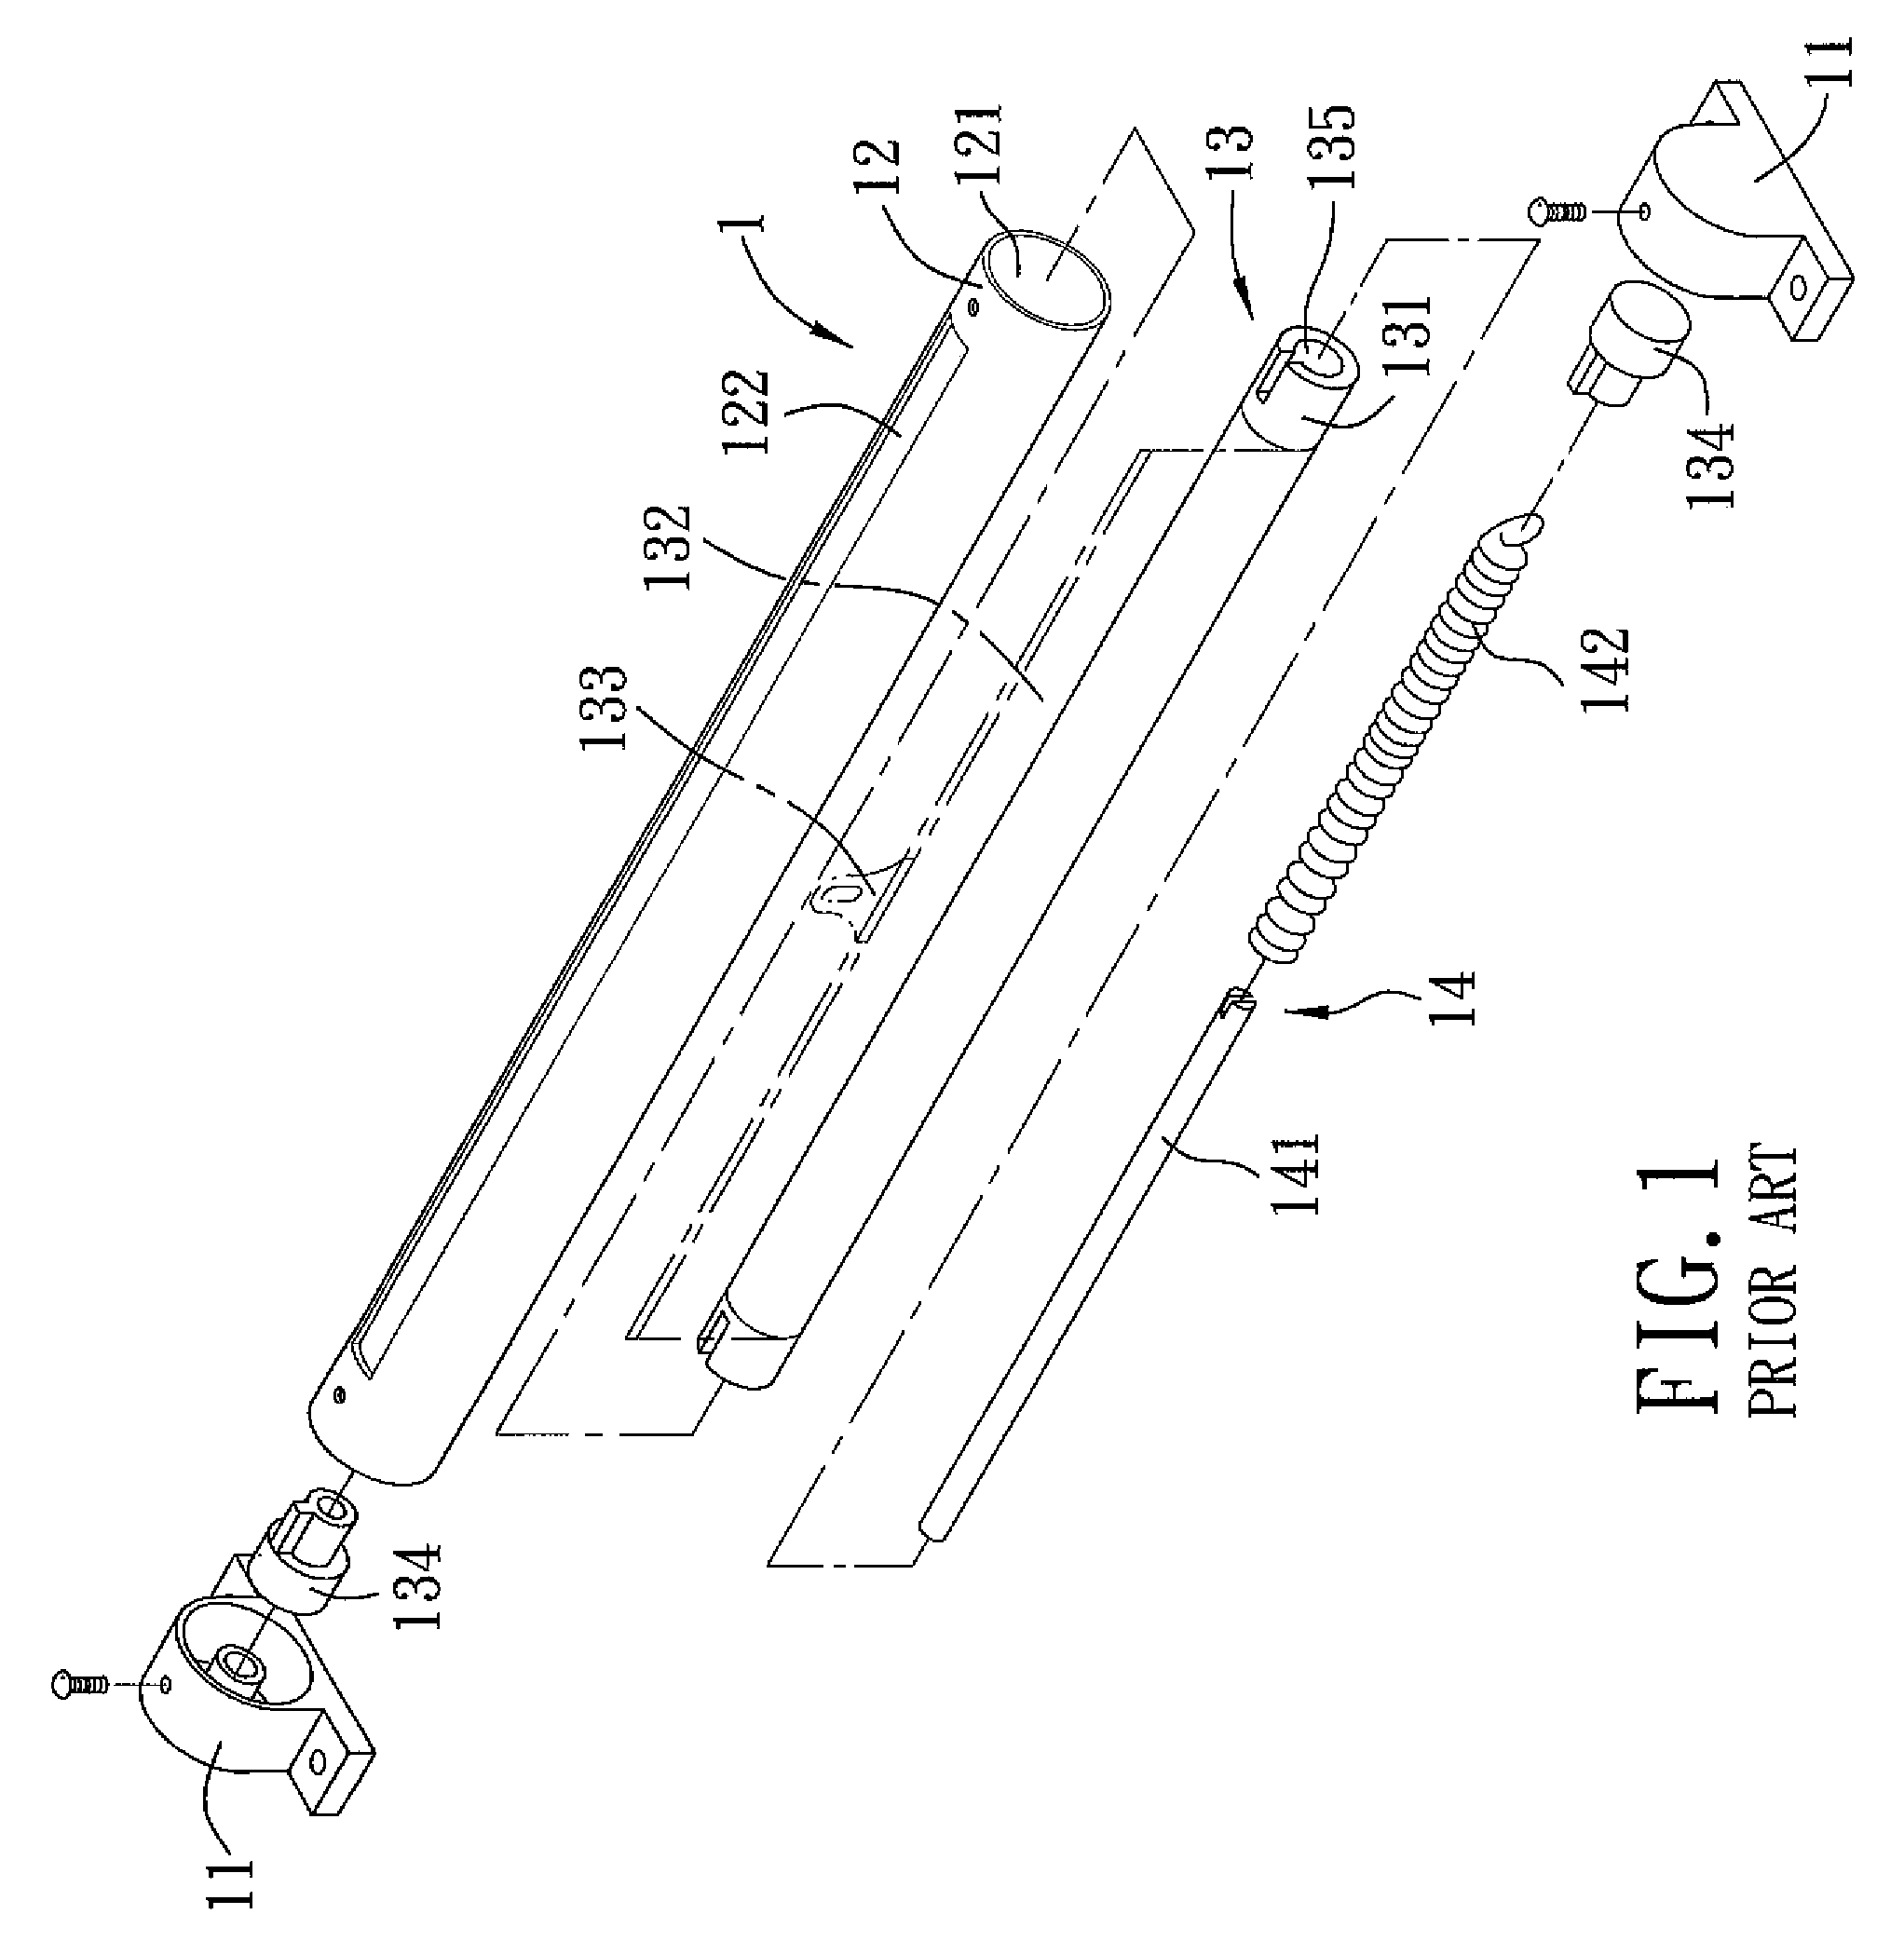 Window covering having a winding function